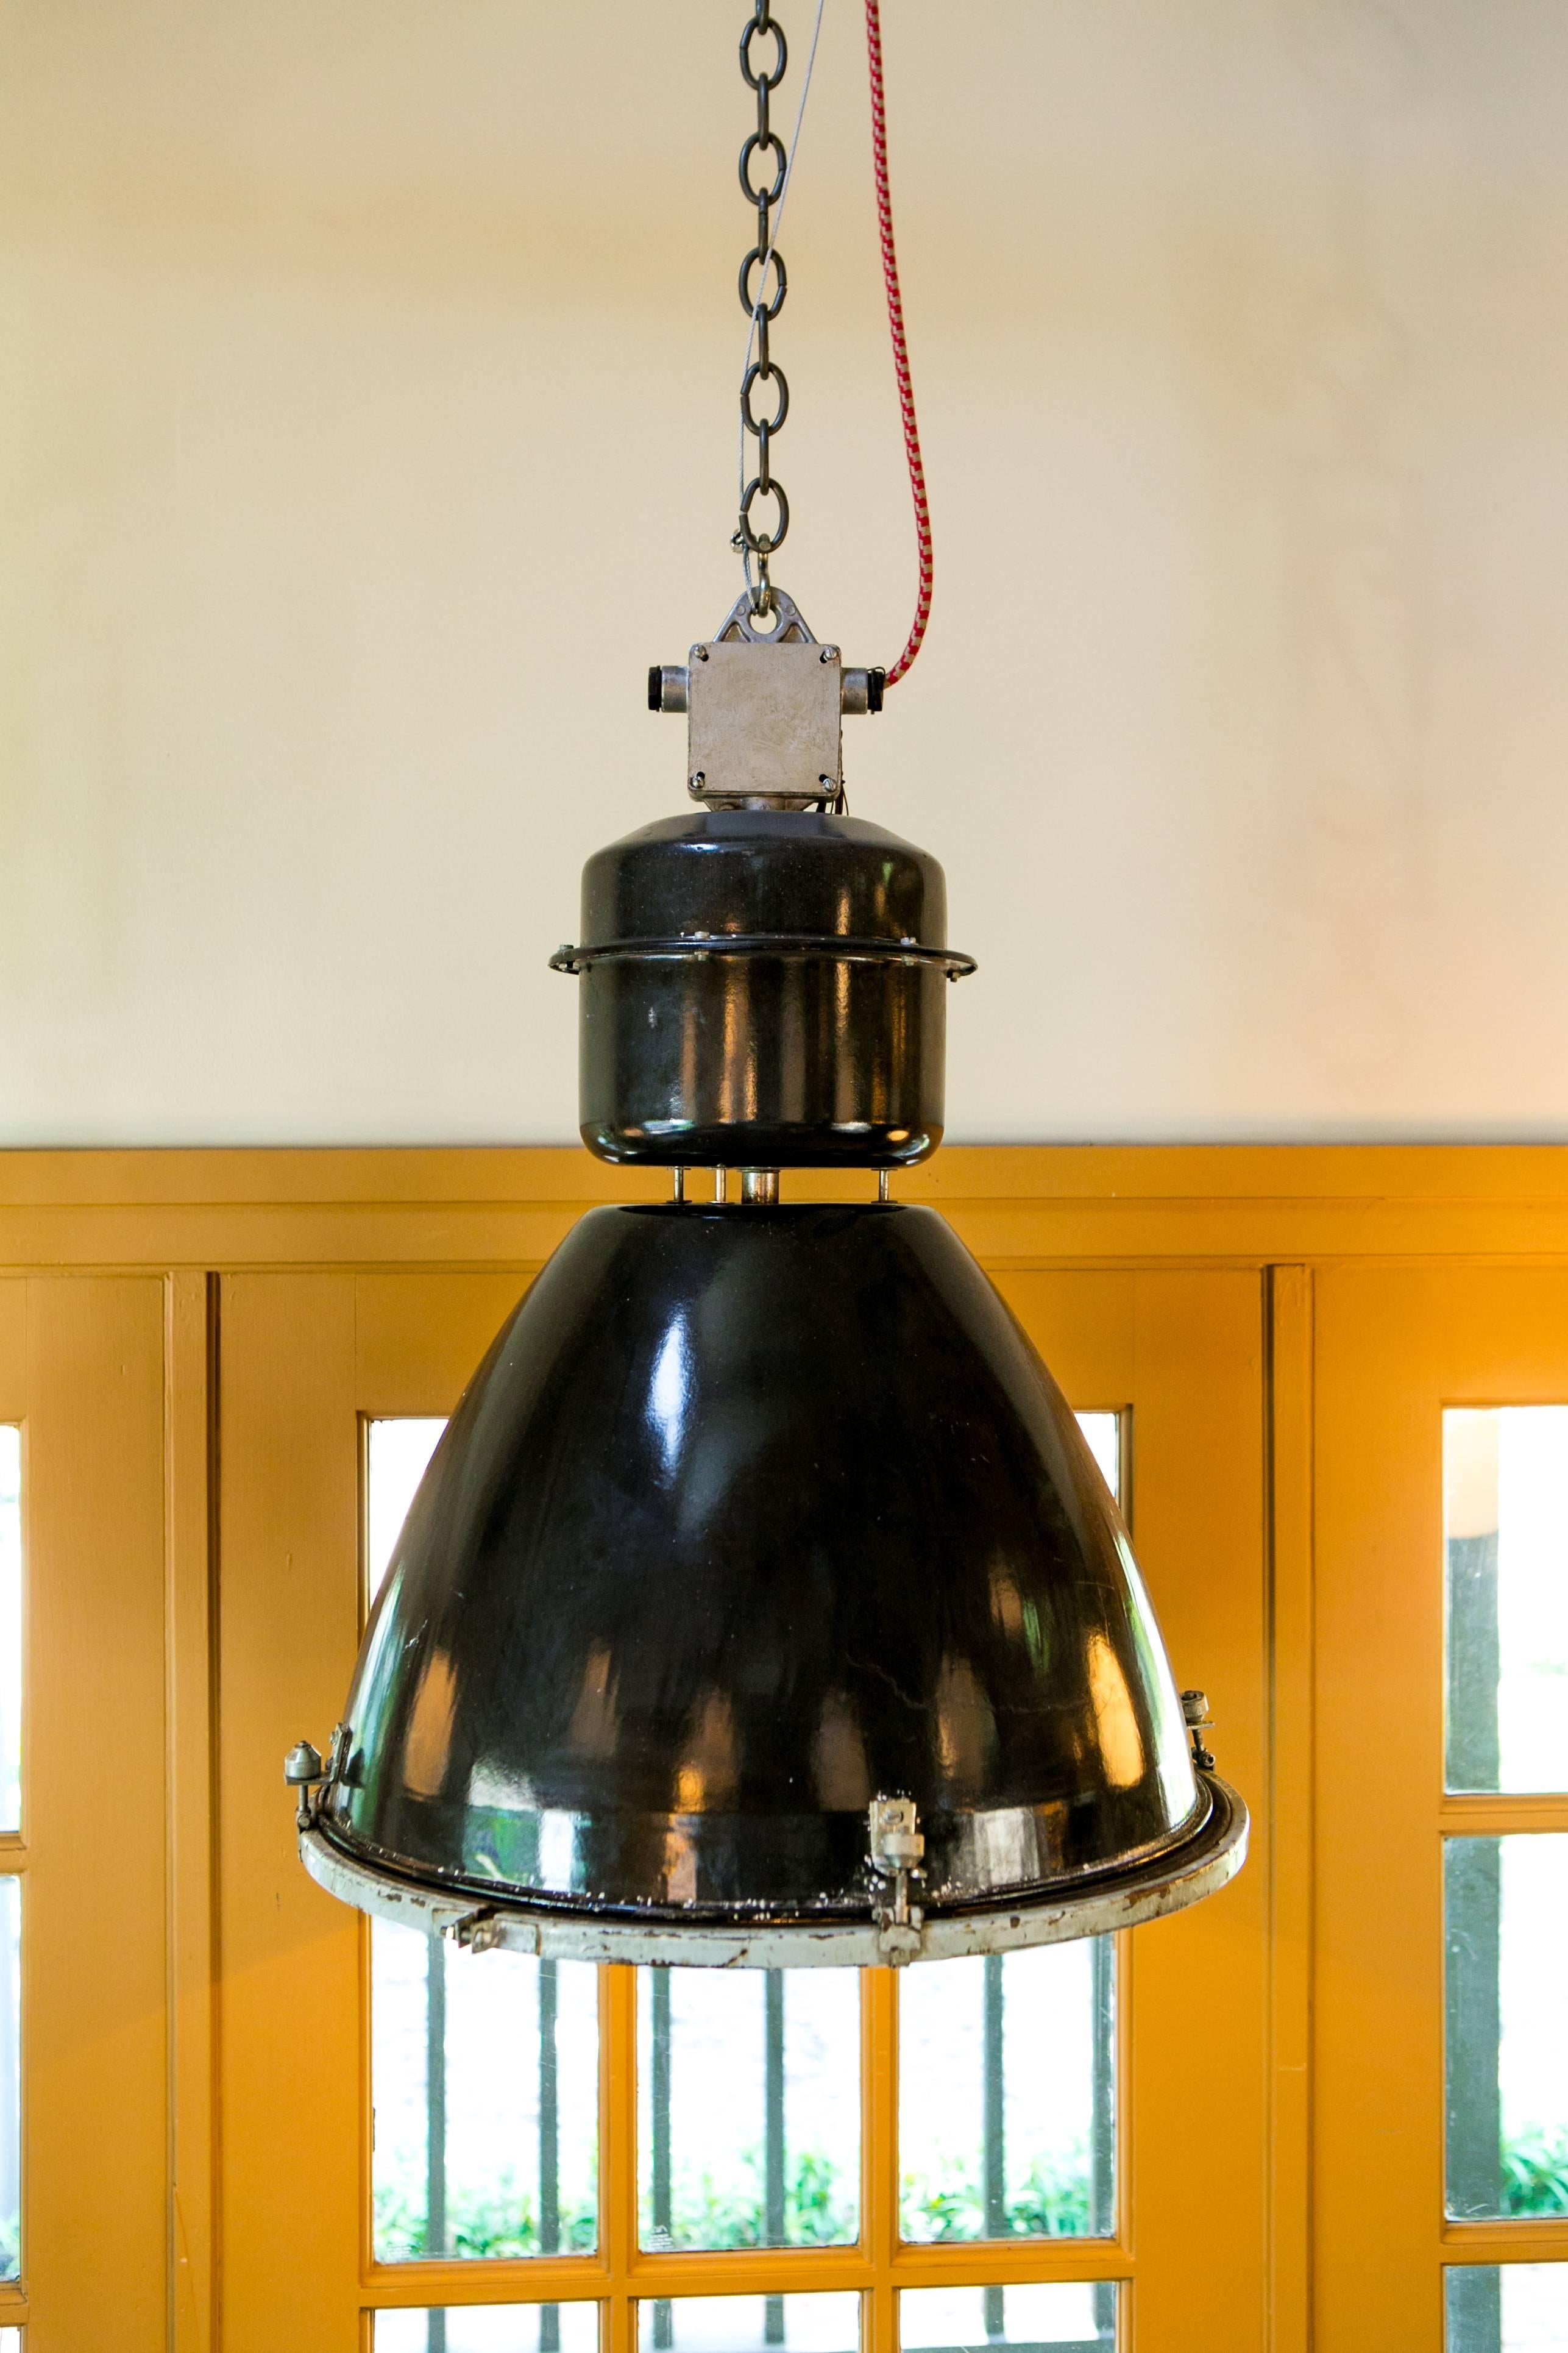 Vintage black enamel Industrial factory light with white interior and a clear glass diffuser. Newly wired with all UL listed parts and a single porcelain Edison socket. Hangs from a silver metal cable and red hounds-tooth fabric wrapped cord. Comes